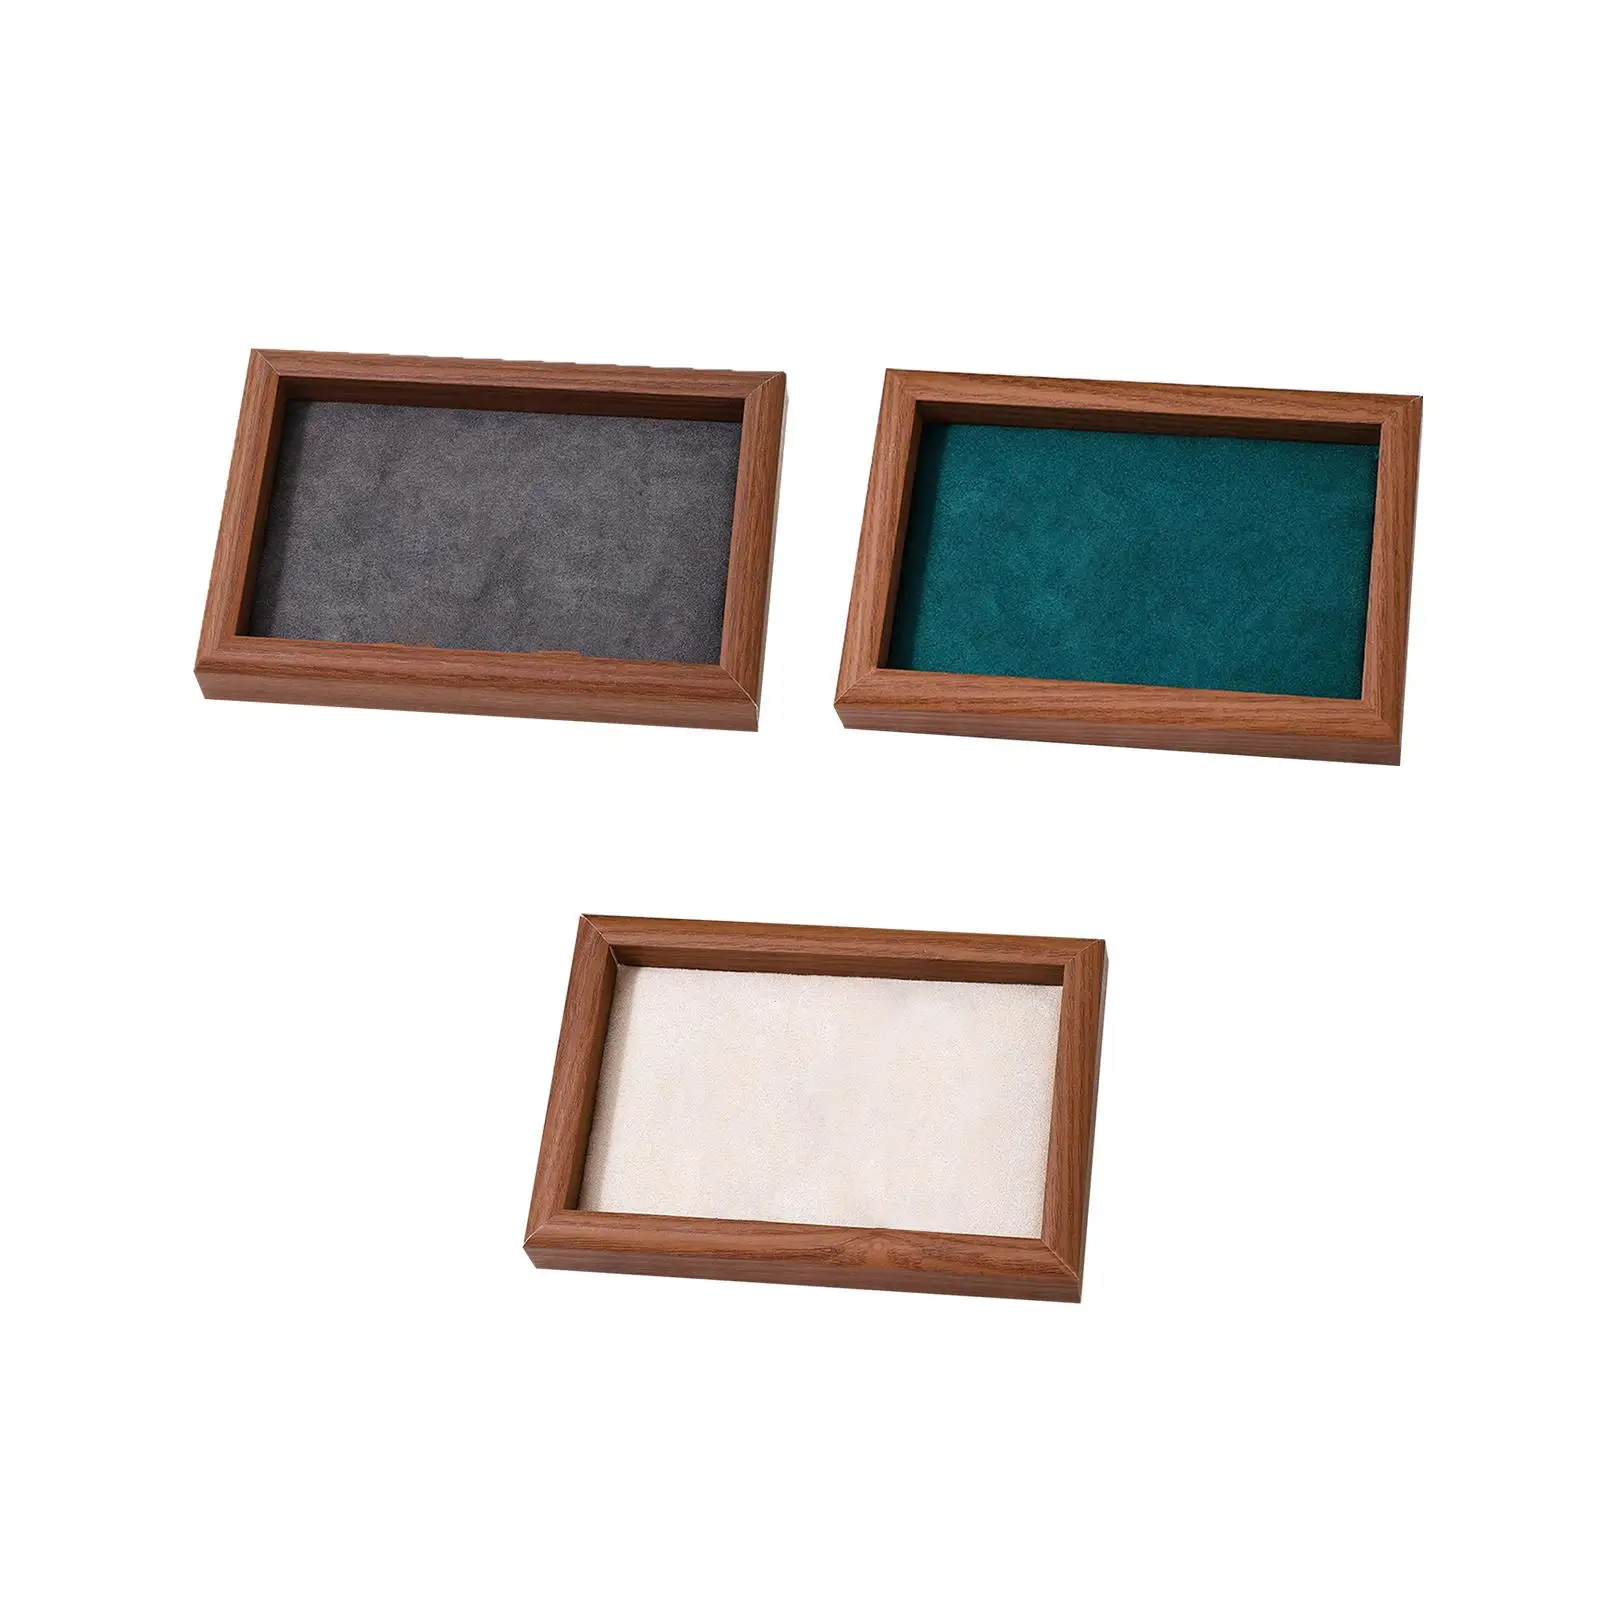 Jewelry Tray Organizer Wooden Showcase Holder Gift Ornament Jewelry Drawer Organizer for Pendants Necklace Watches Ring Bracelet